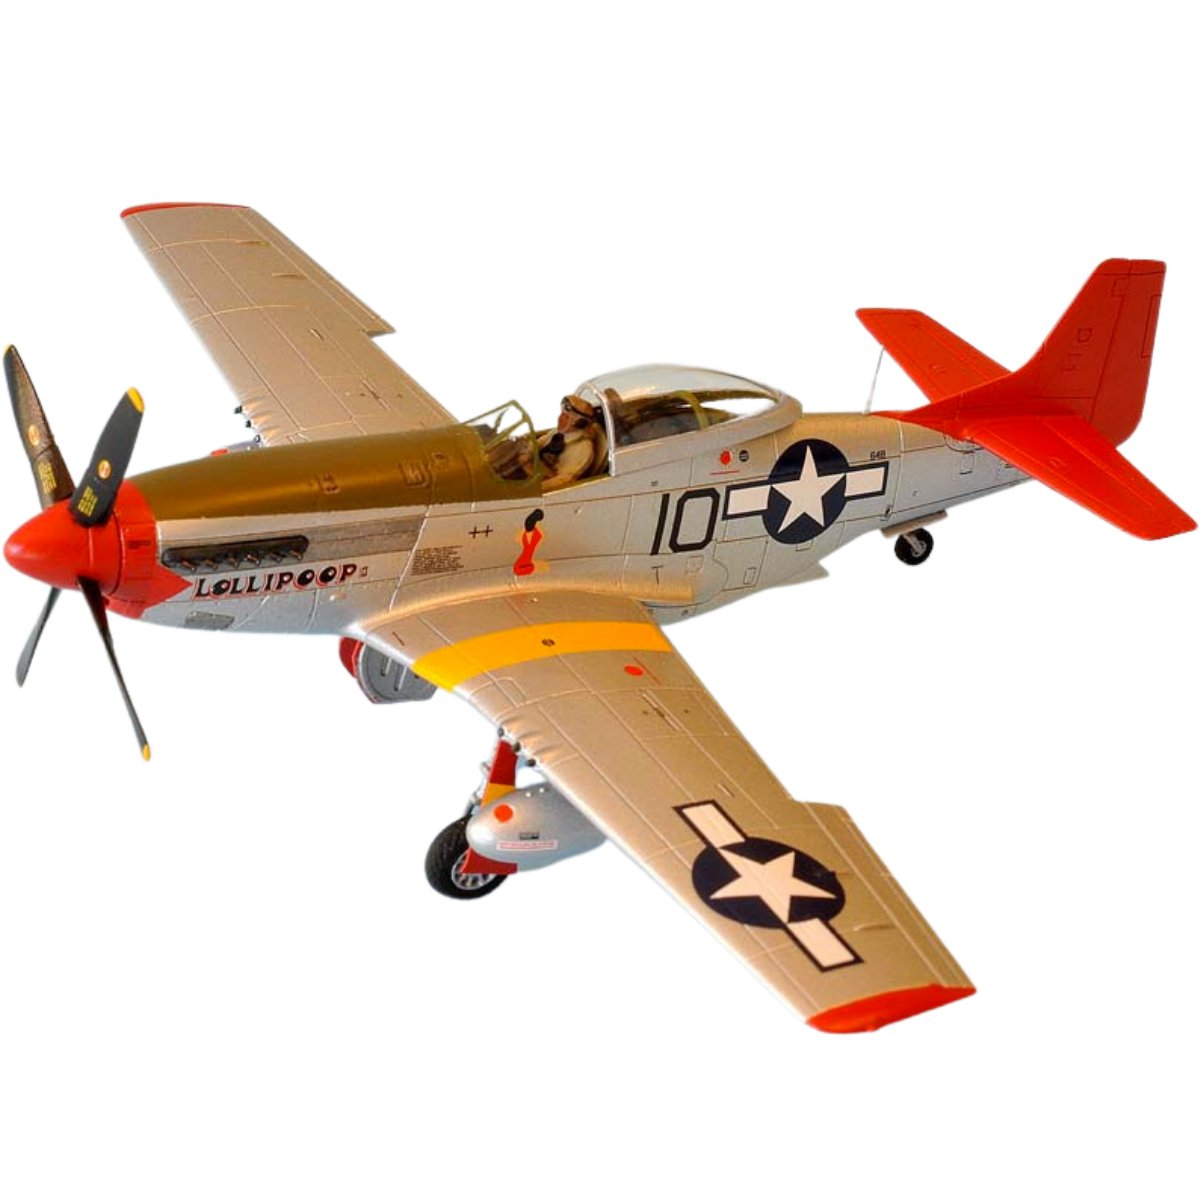 Airfix A01004 North American P-51D Mustang 1:72 - Phillips Hobbies